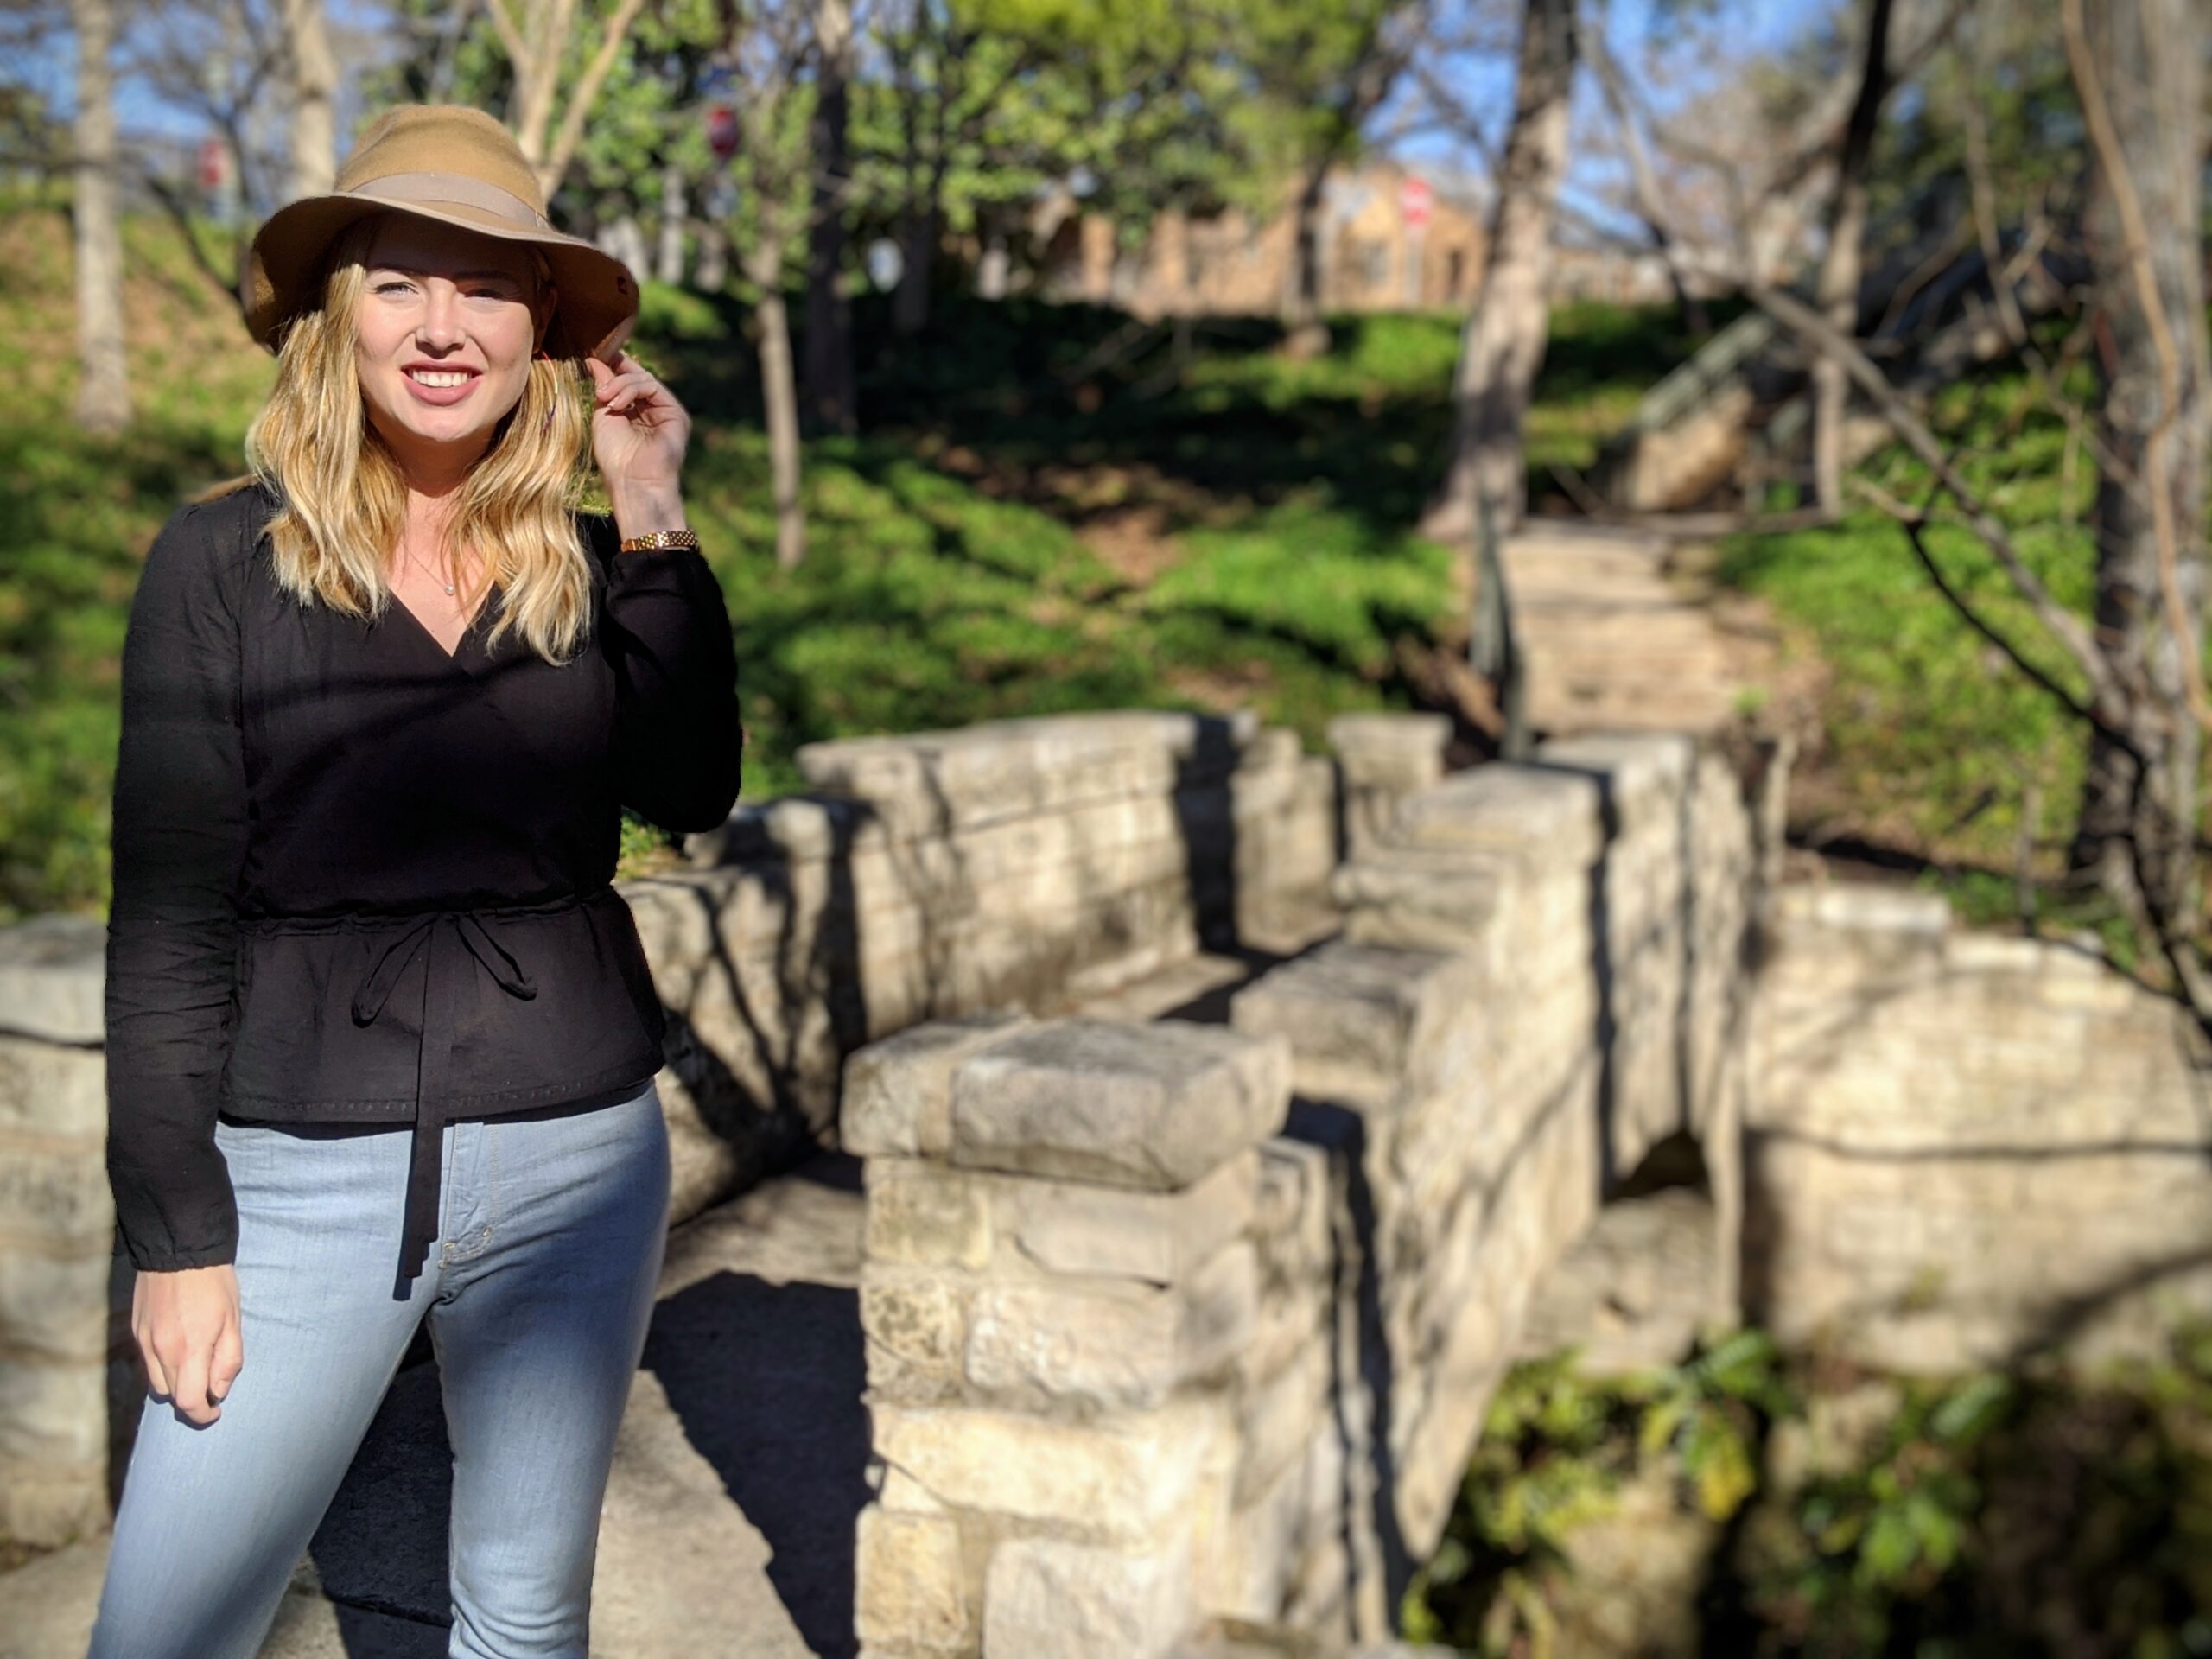 Elizabeth stands near a stone bridge in a park in the wintertime. She is wearing a tan felt hat, and a handmade black wrap top and light colored denim jeans.